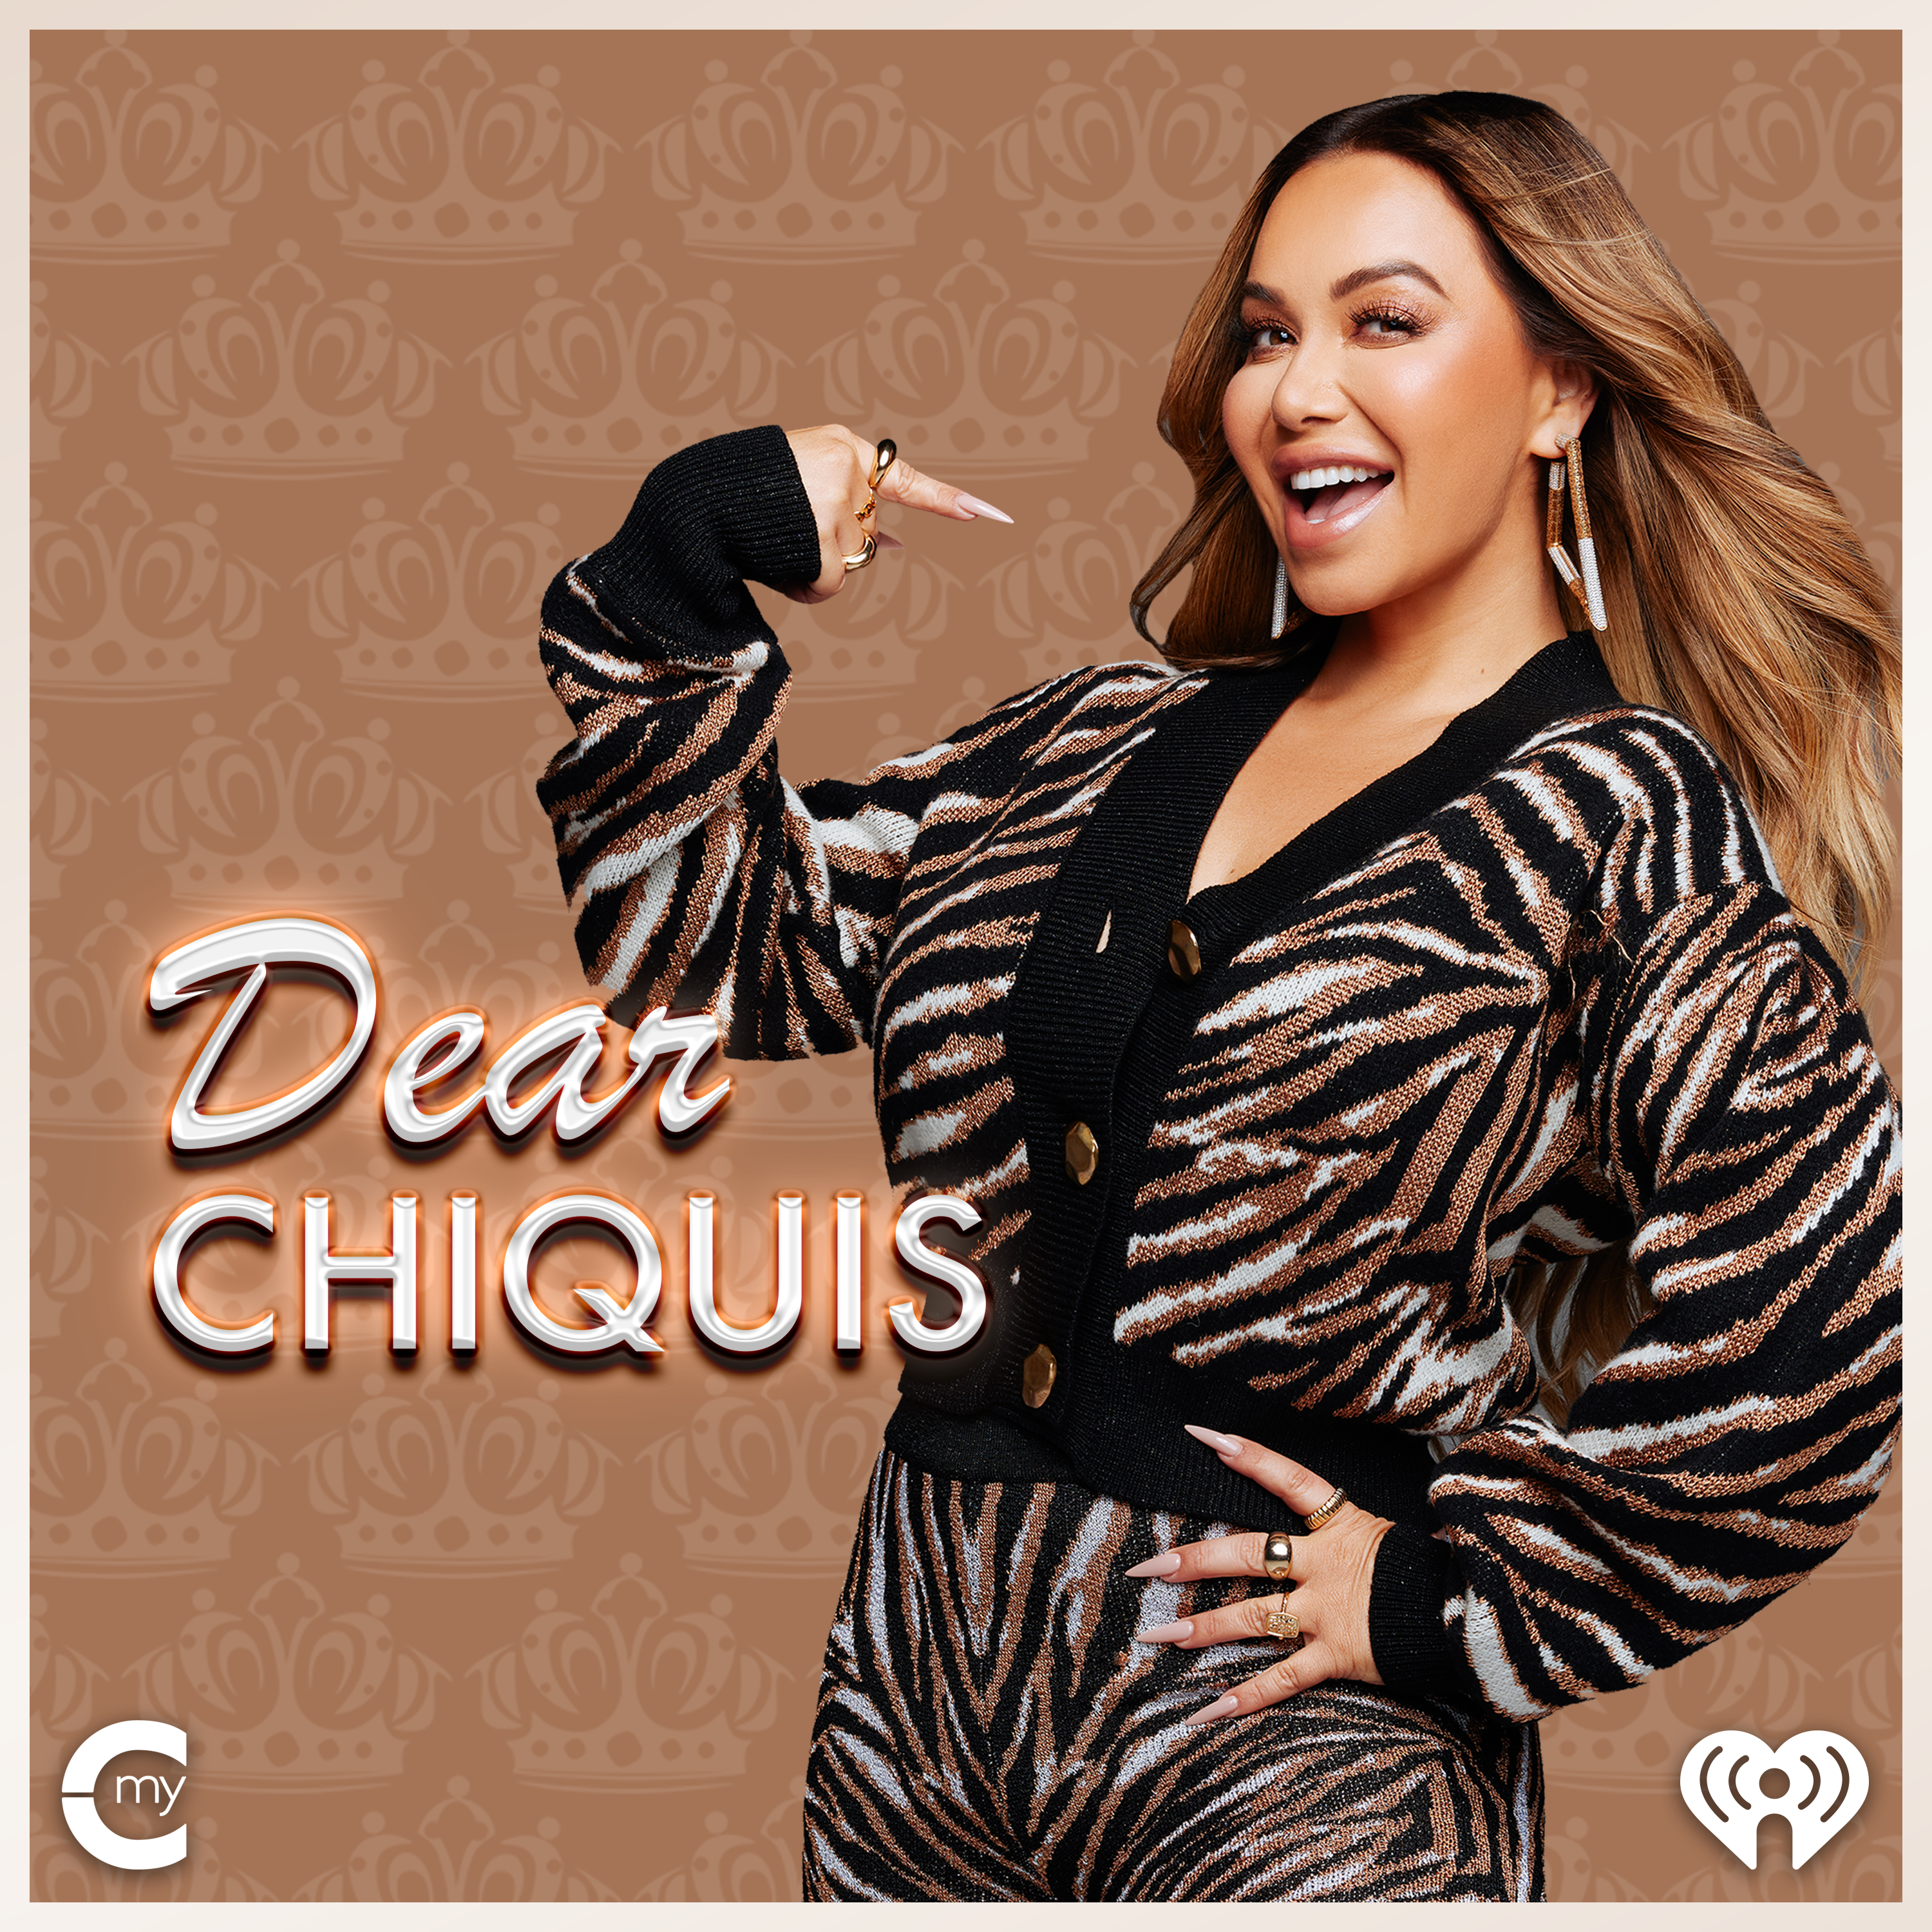 Dear Chiquis: Dating While Living with Your Parents, Getting Rid of Cellulite and Another Case of Toxic Loyalty